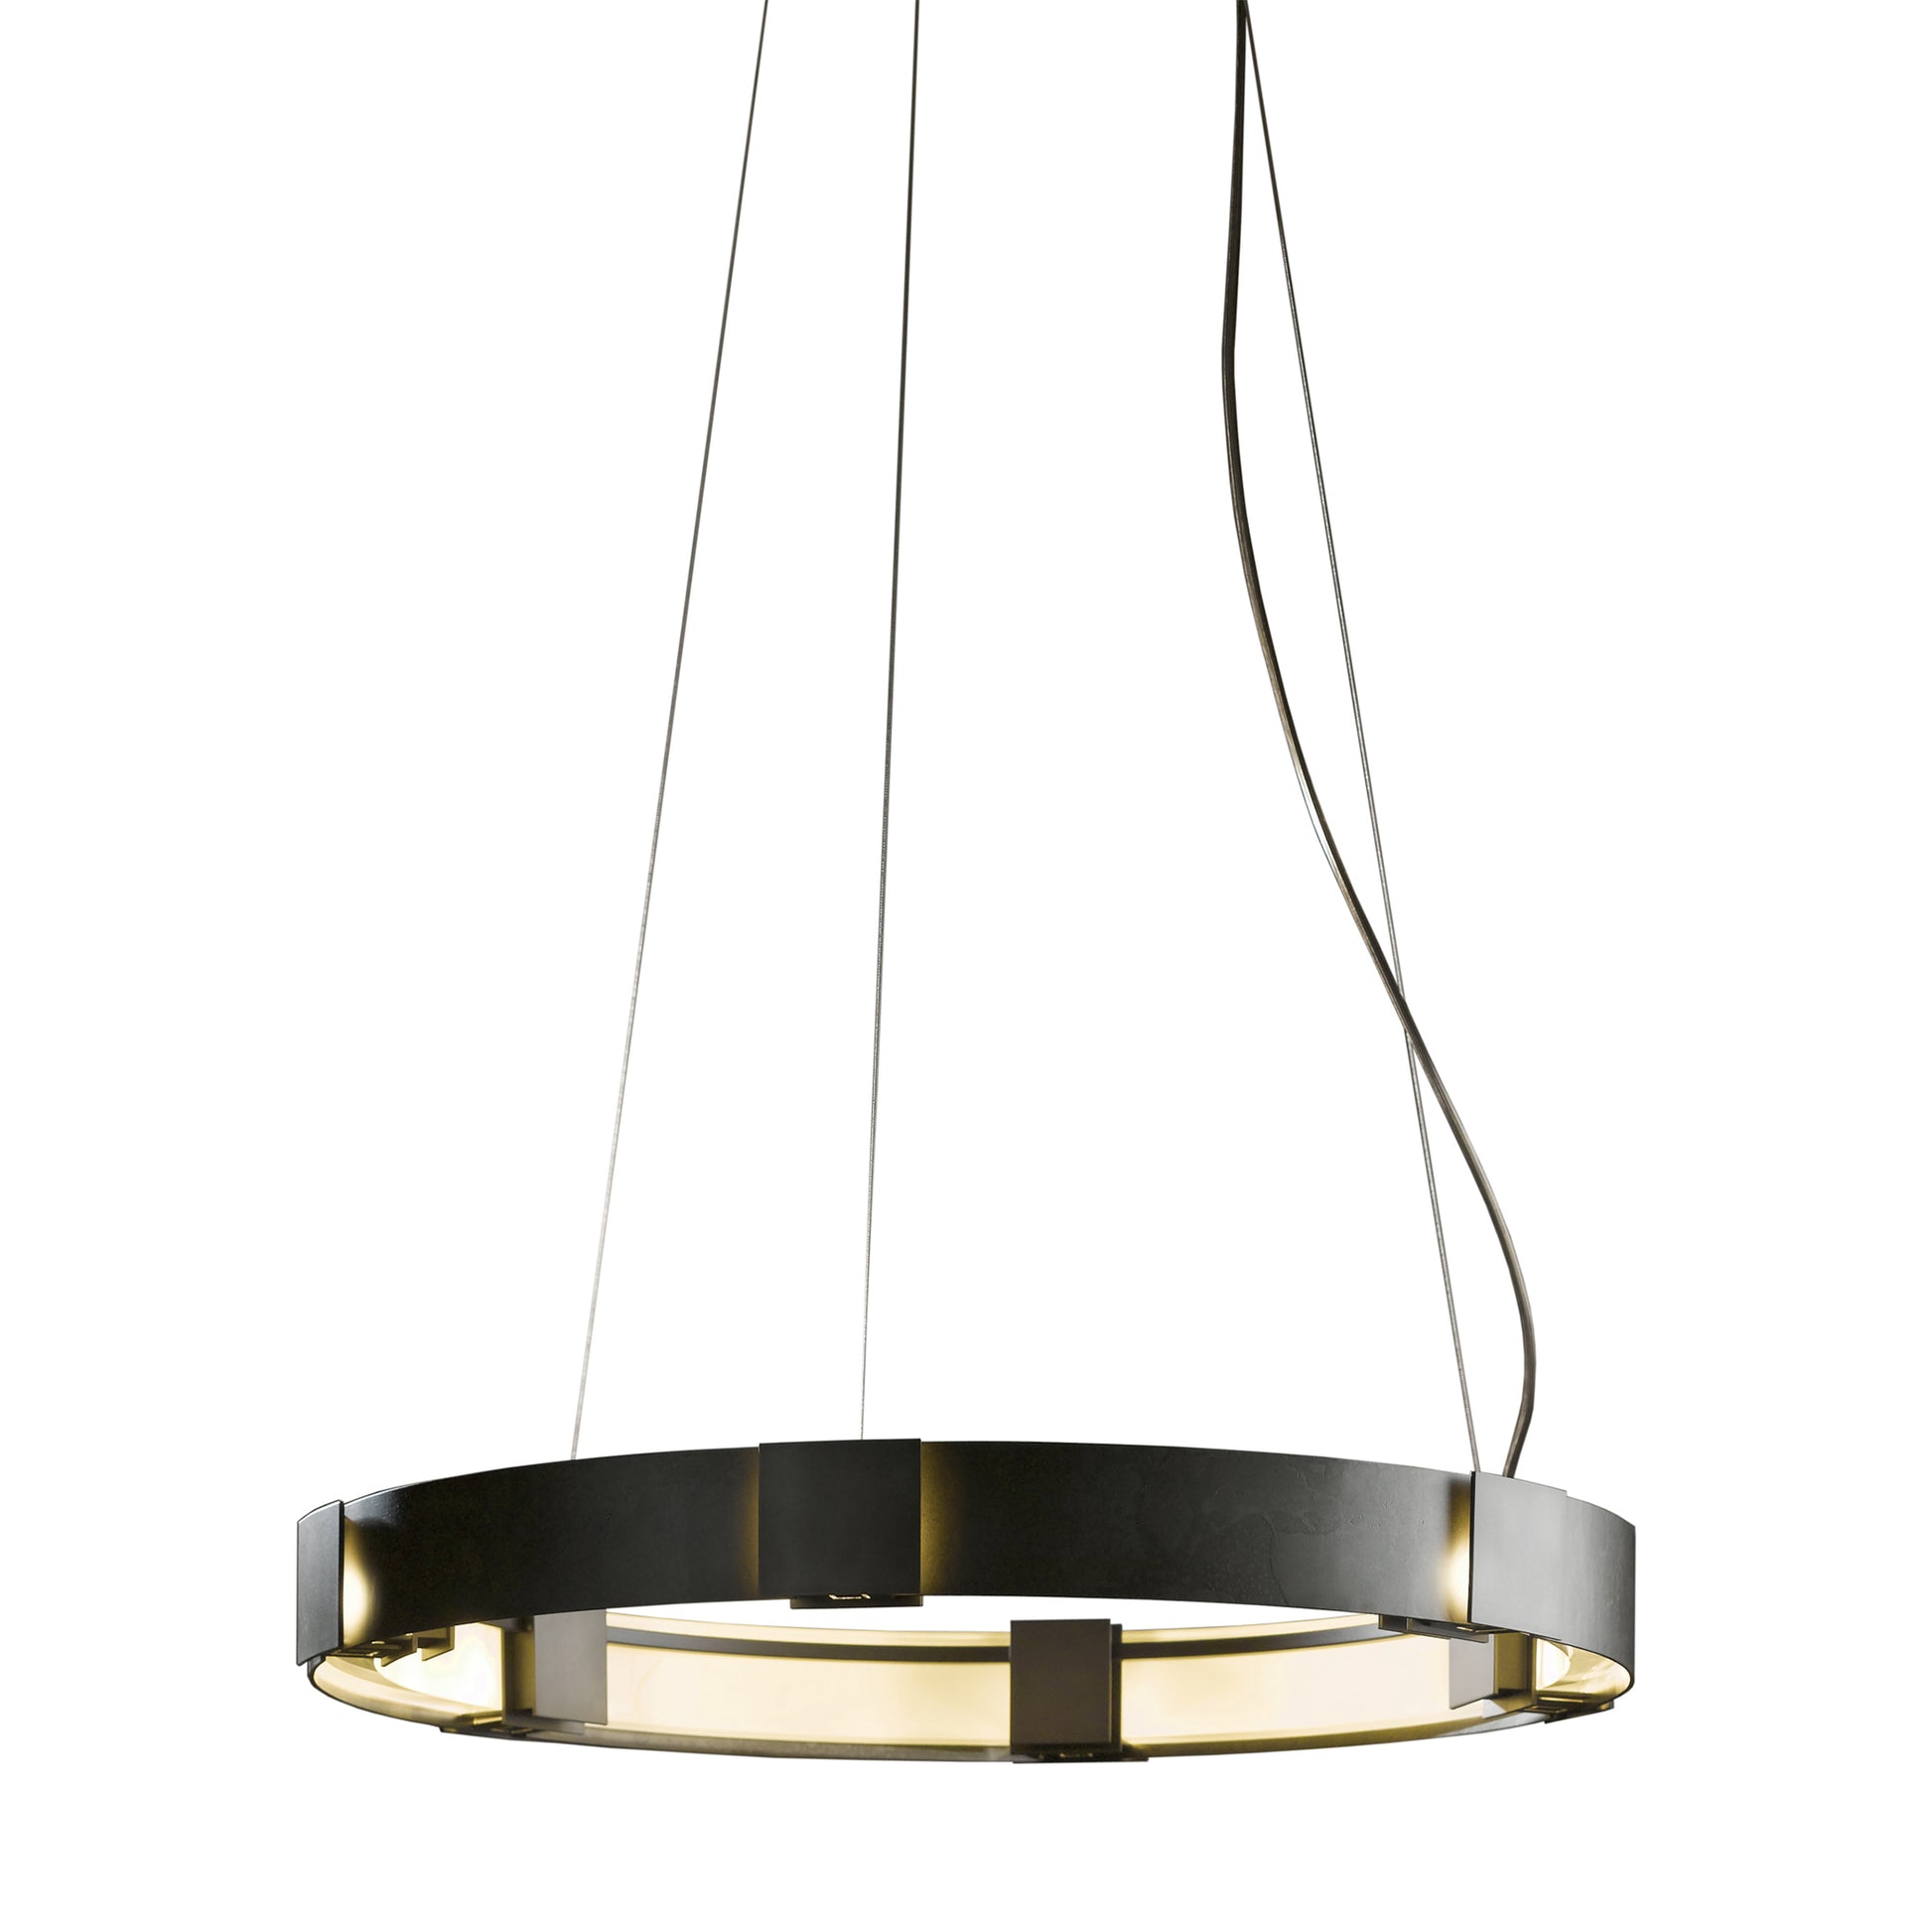 The Hubbardton Forge Aura Pendant features a sleek and modern circular shape, crafted by Vermont artisans.